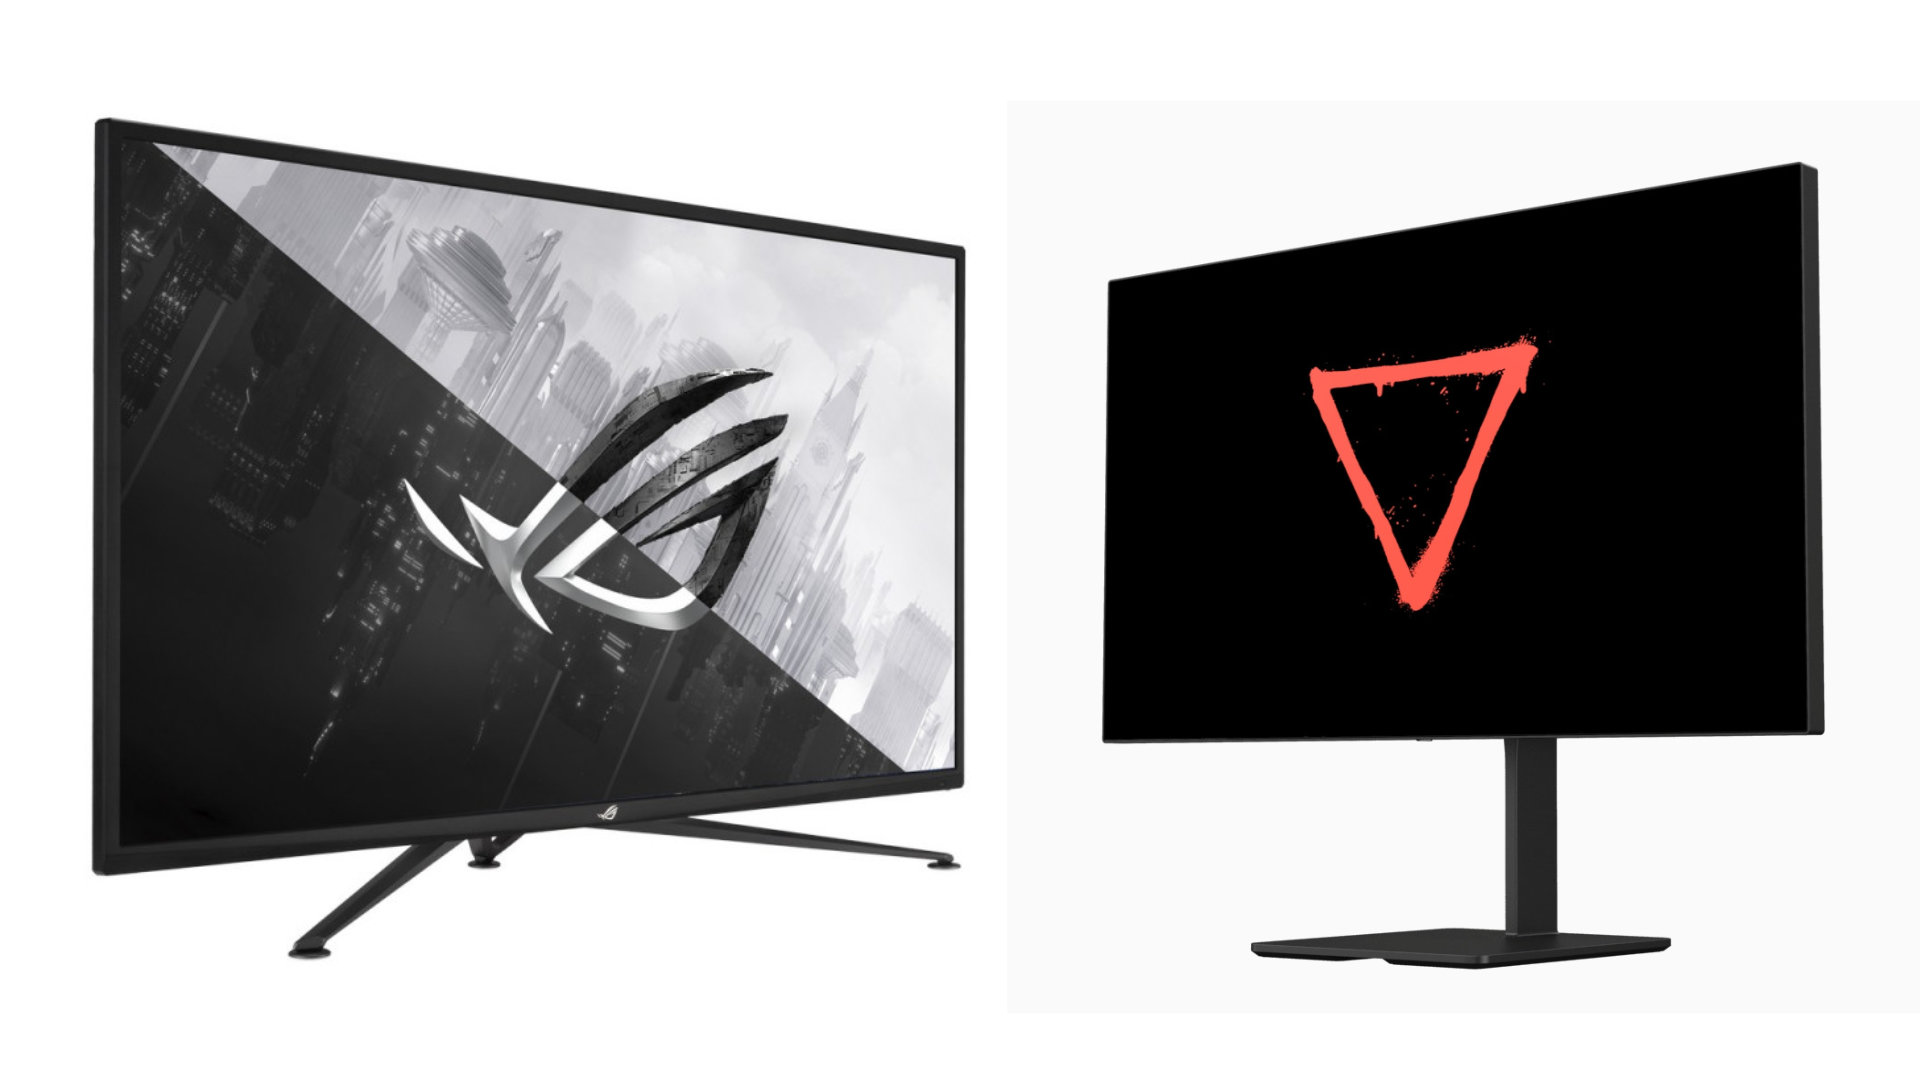 The Eve Spectrum races to beat Asus as the first HDMI 2.1 gaming monitor